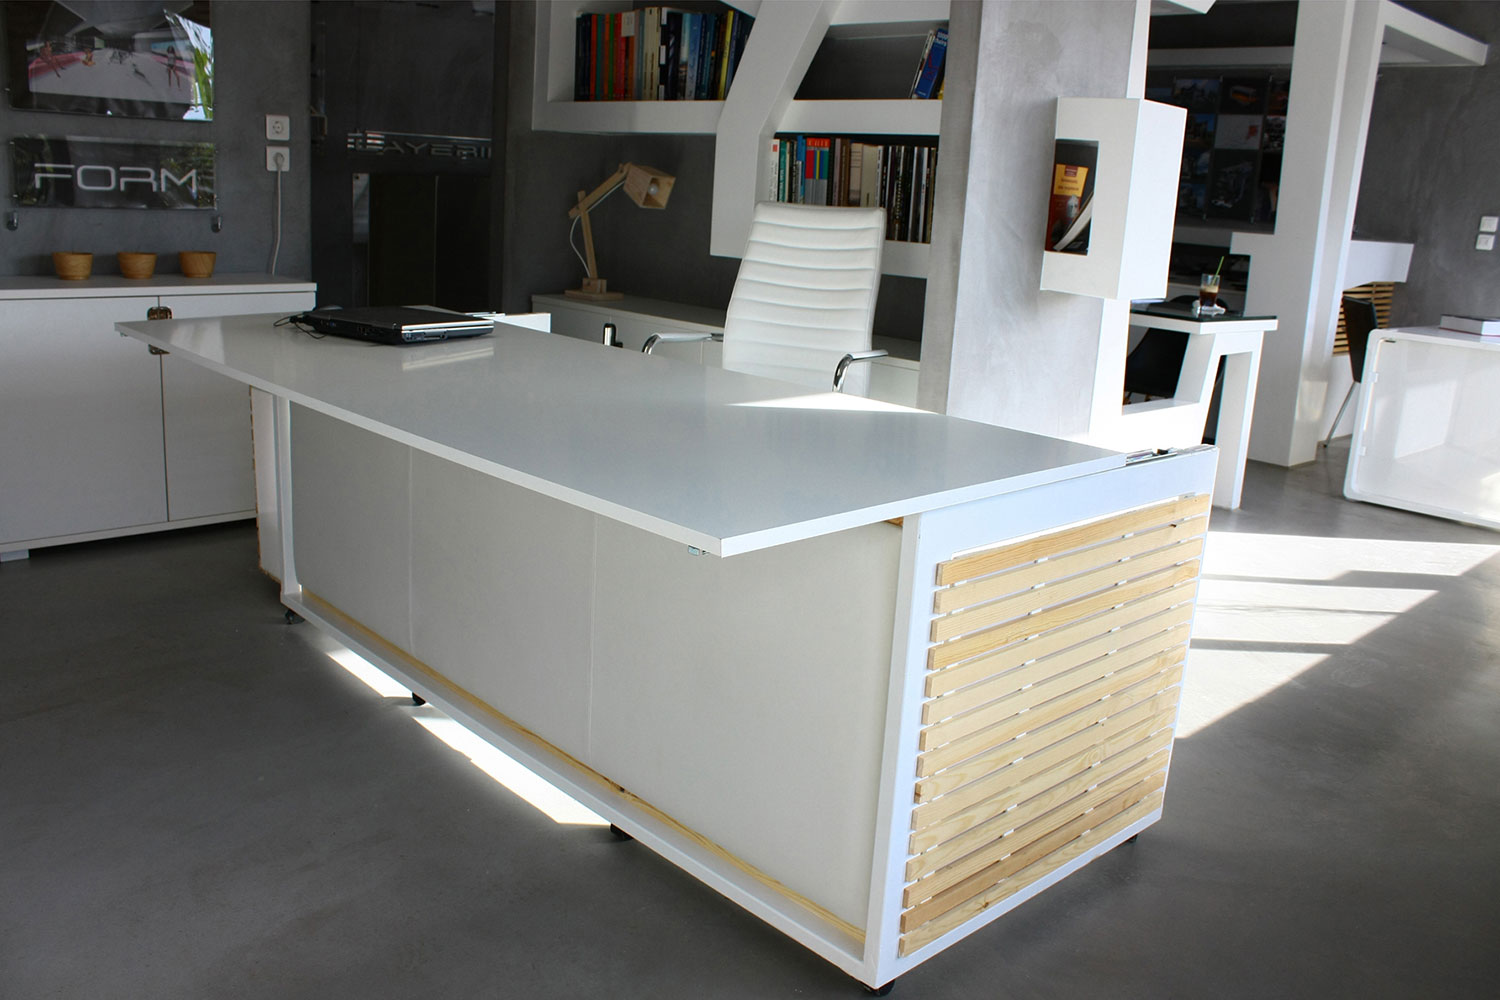 this bed desk would make it easy to nap at work 1  6 s m of life 005